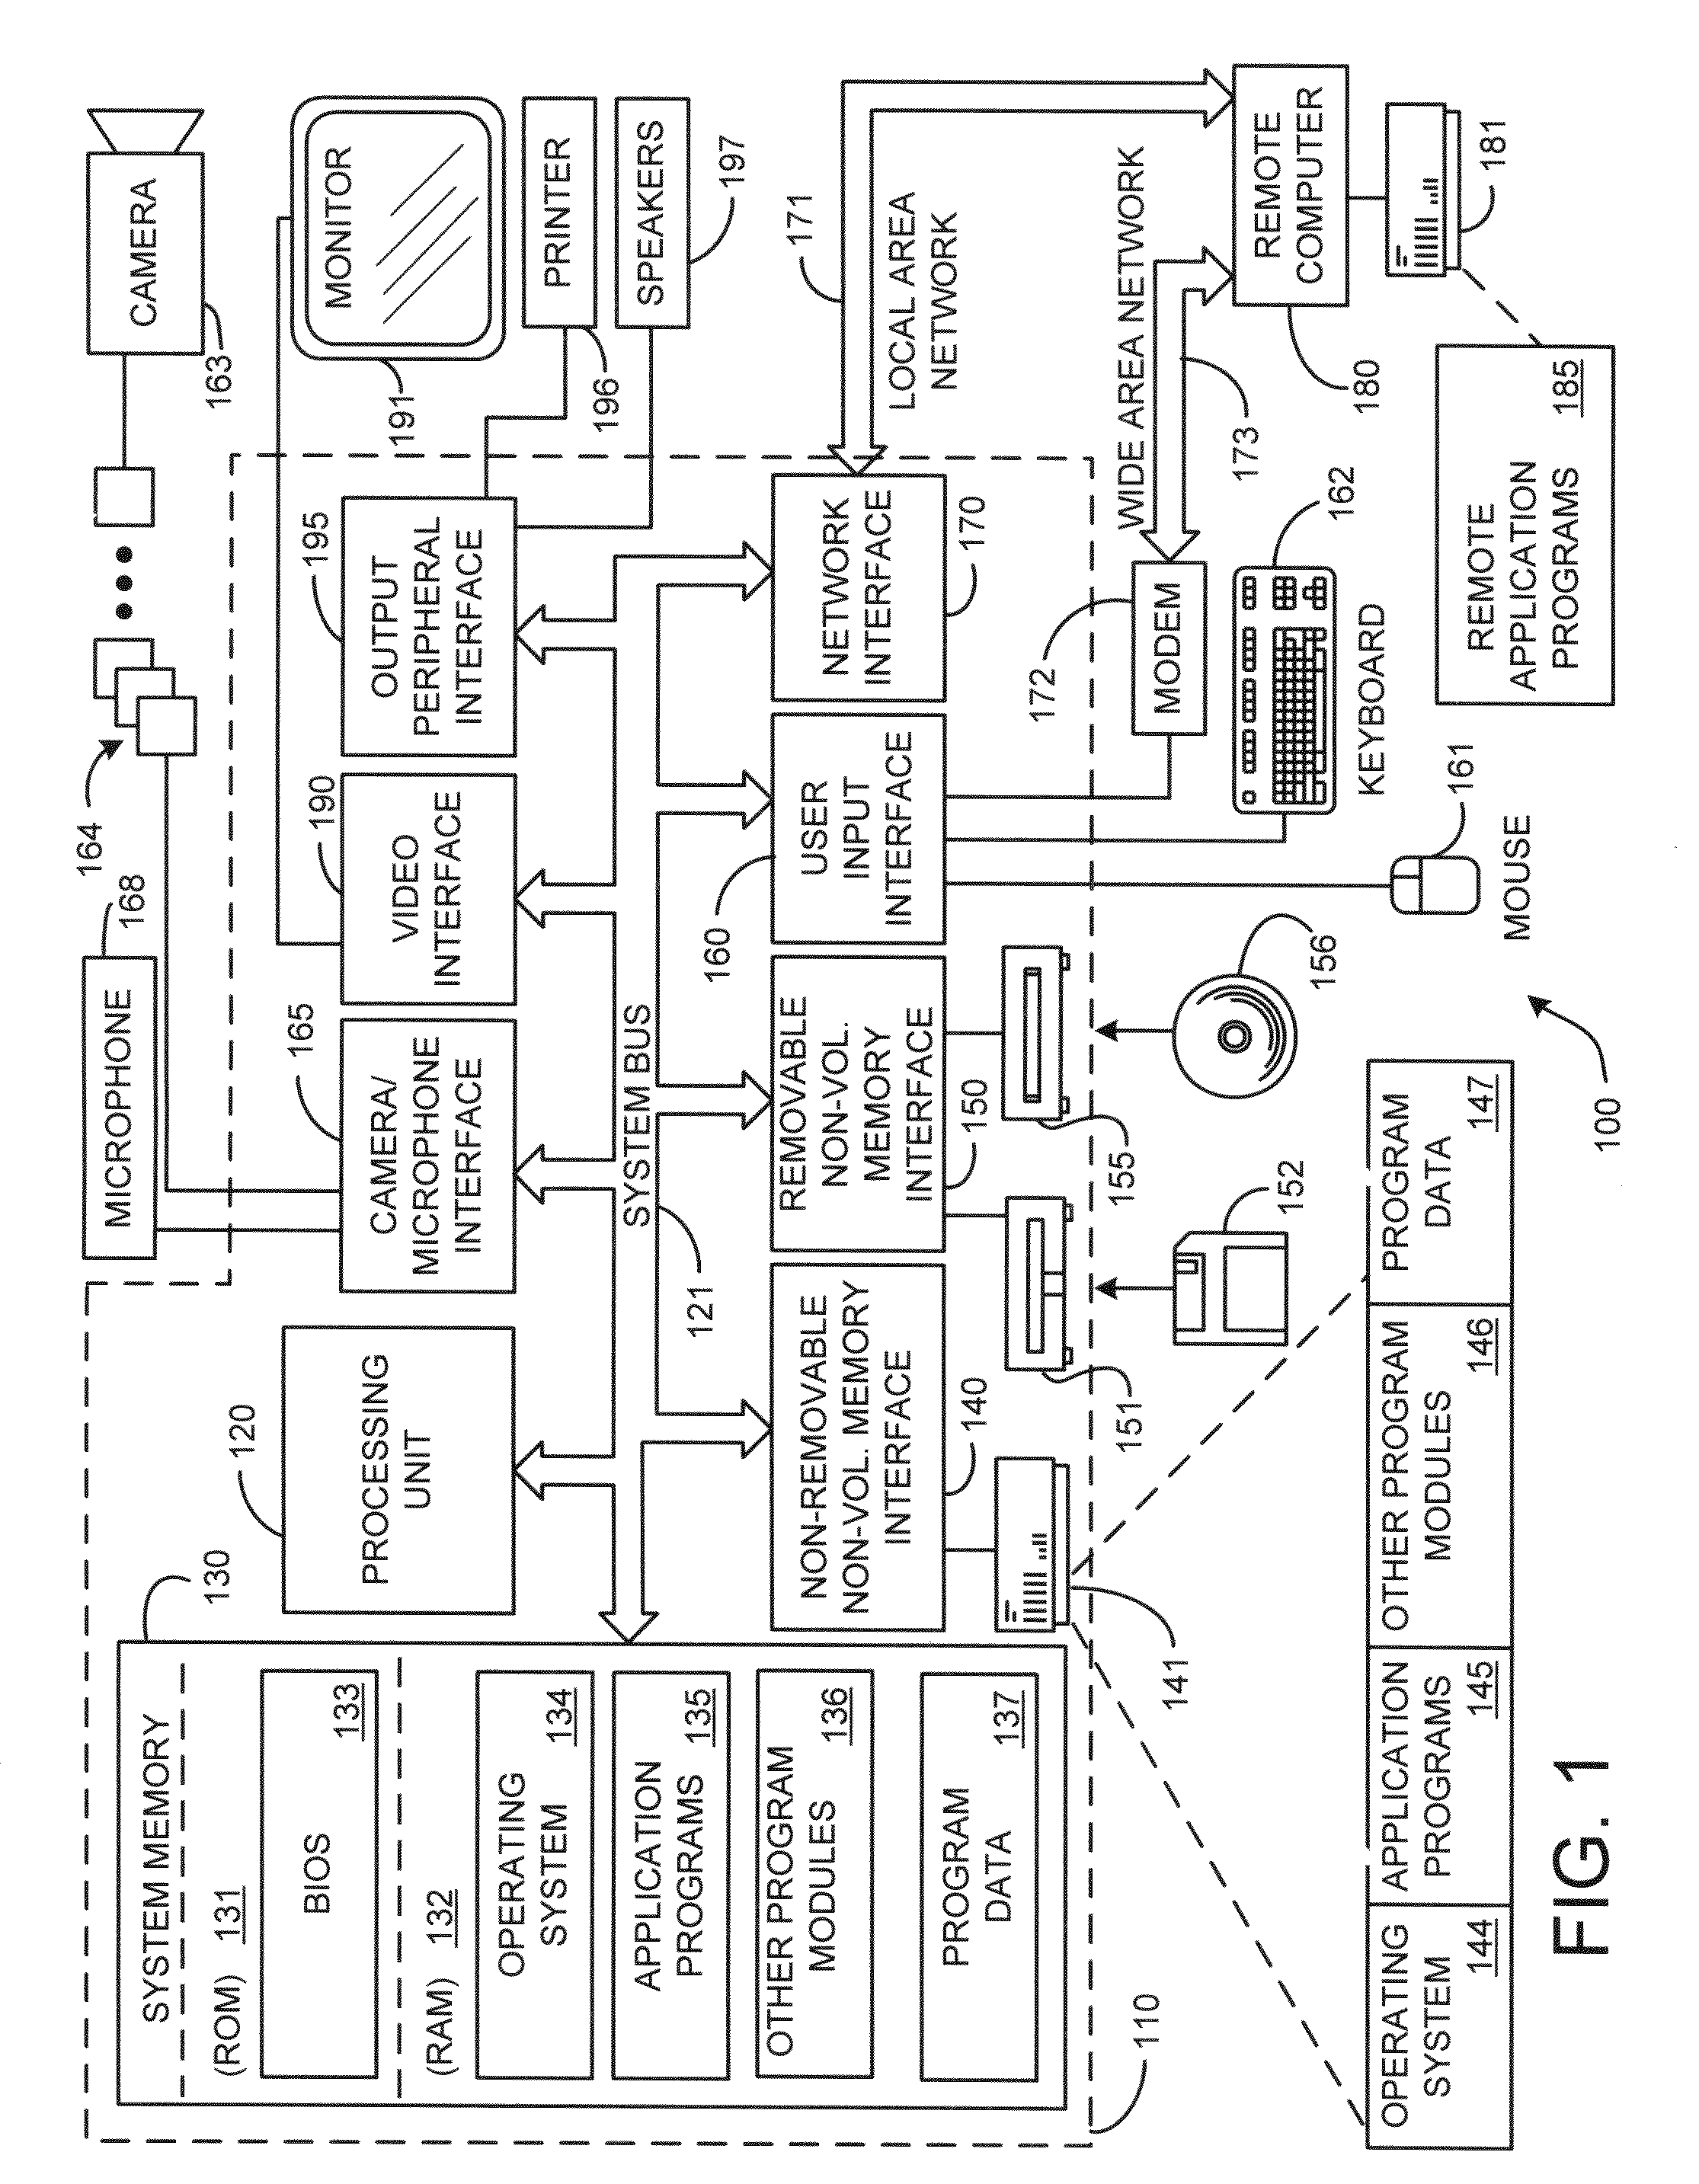 System and method for distributed meetings